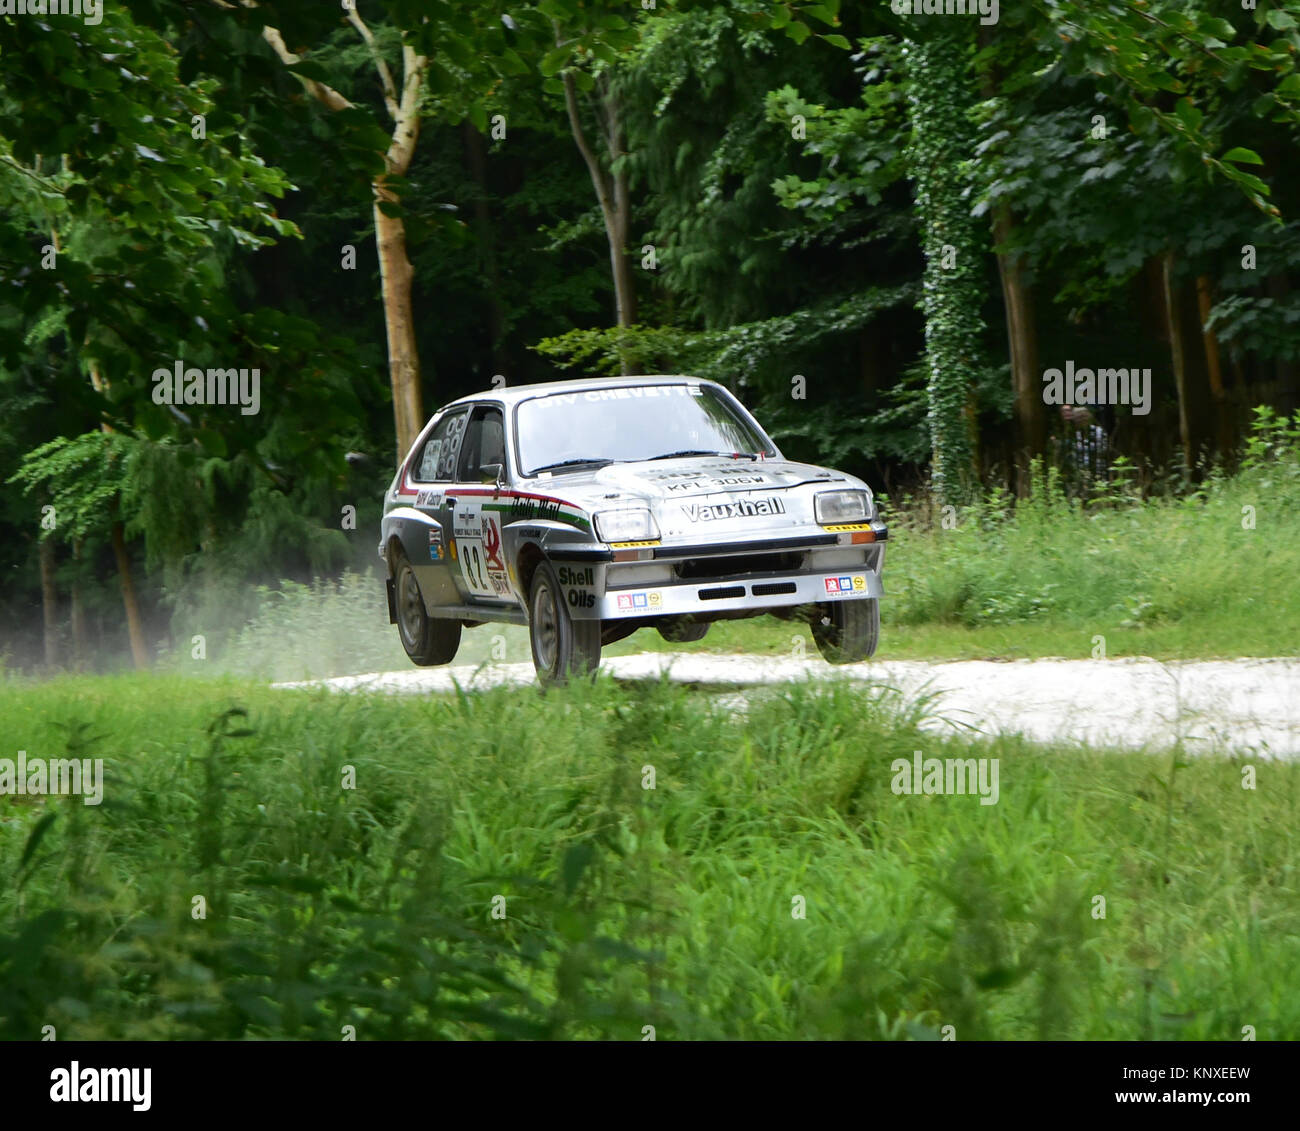 Lee Kedward, Vauxhall Chevette HSR, KFL 306 W, Forest rally stage, Goodwood FoS 2015, 2015, Classic, dust, entertainment, fearless, Festival of Speed, Stock Photo